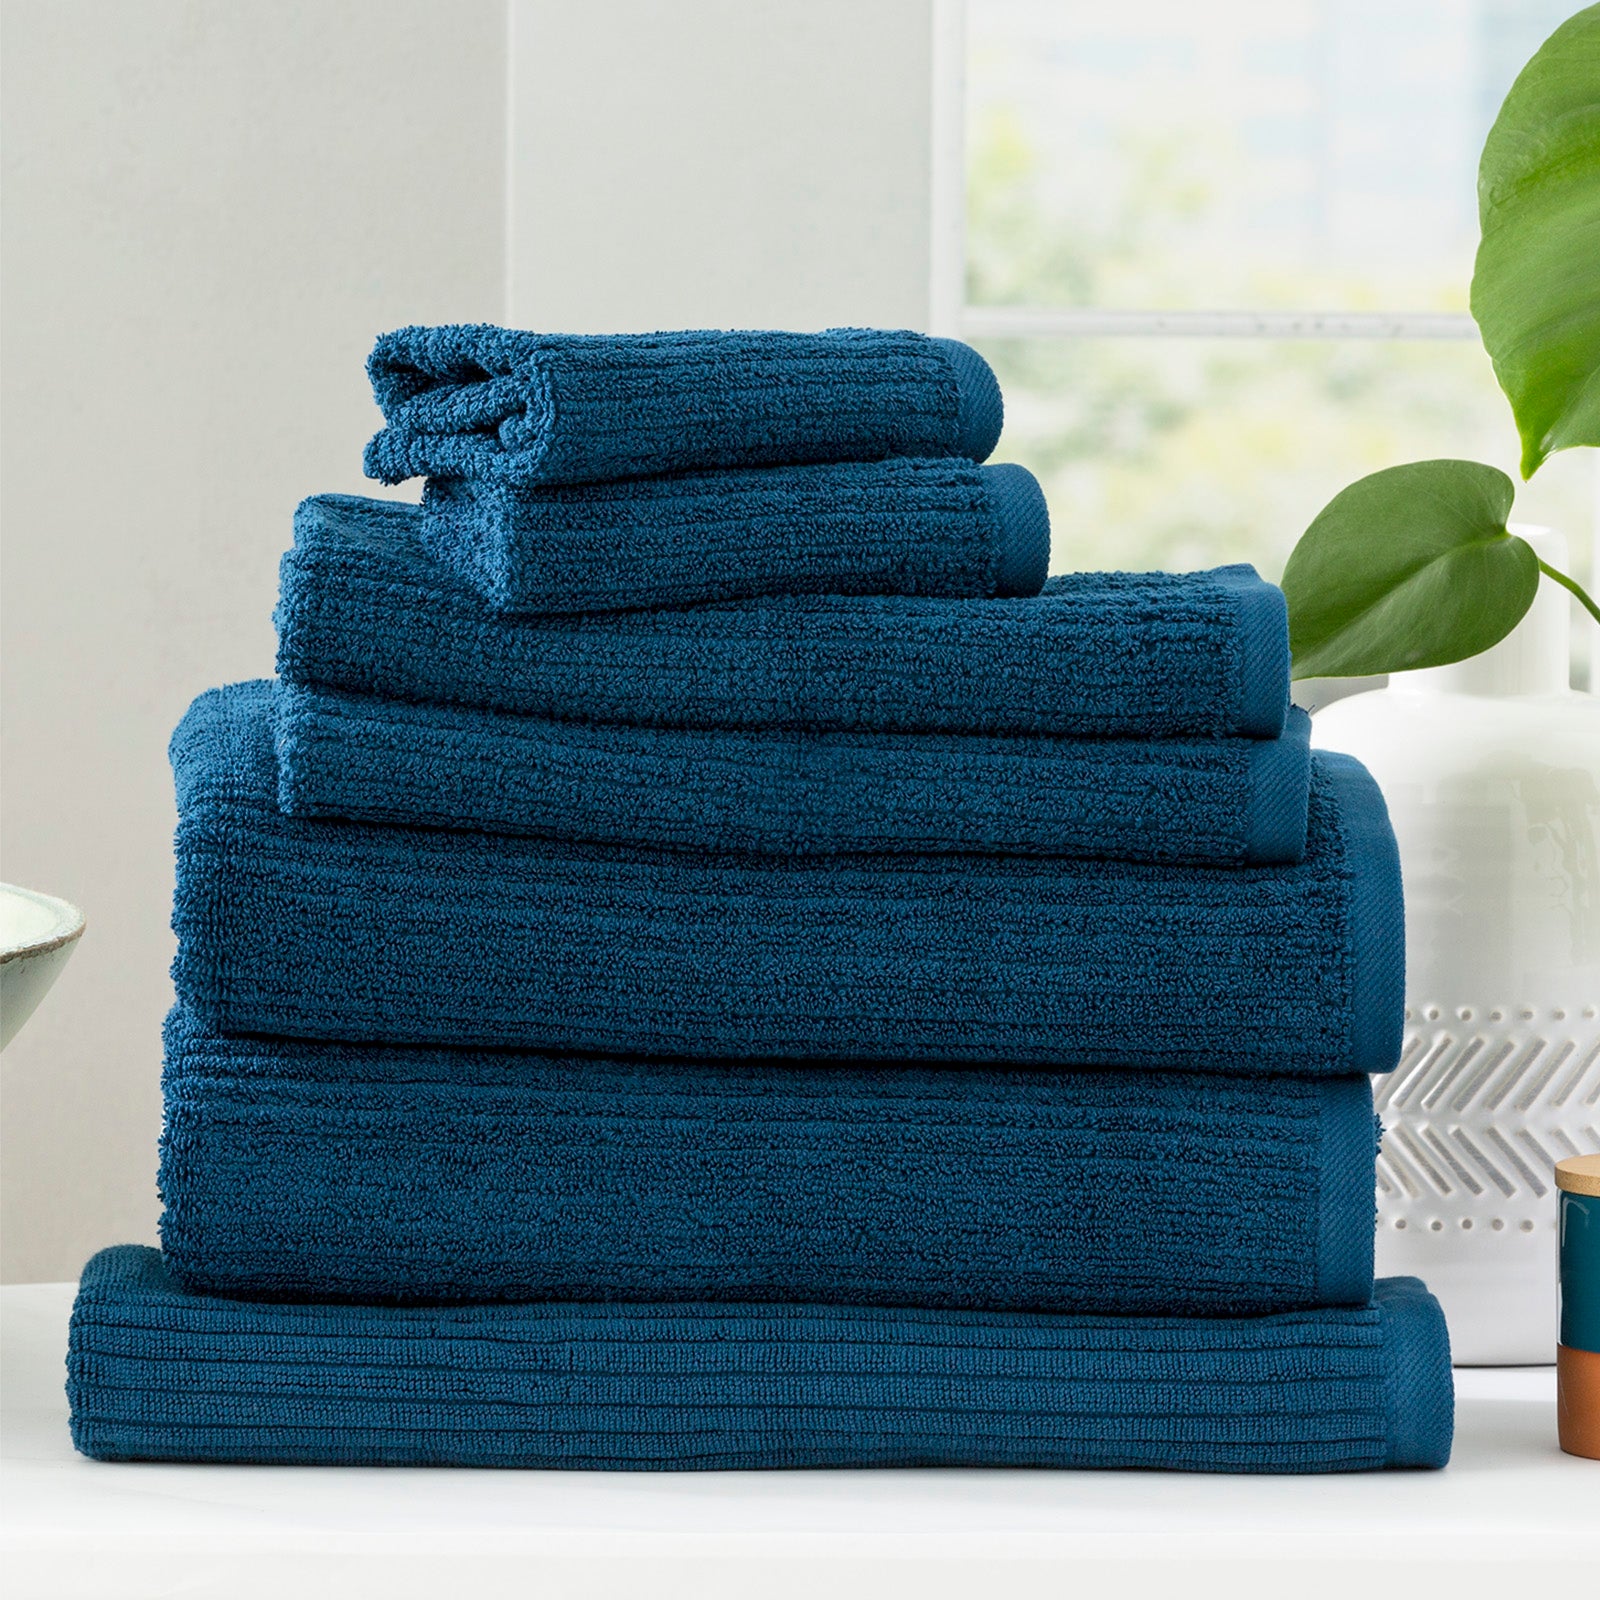 Renee Taylor Cobblestone 650 GSM Cotton Ribbed Towel Packs 7pc Ink